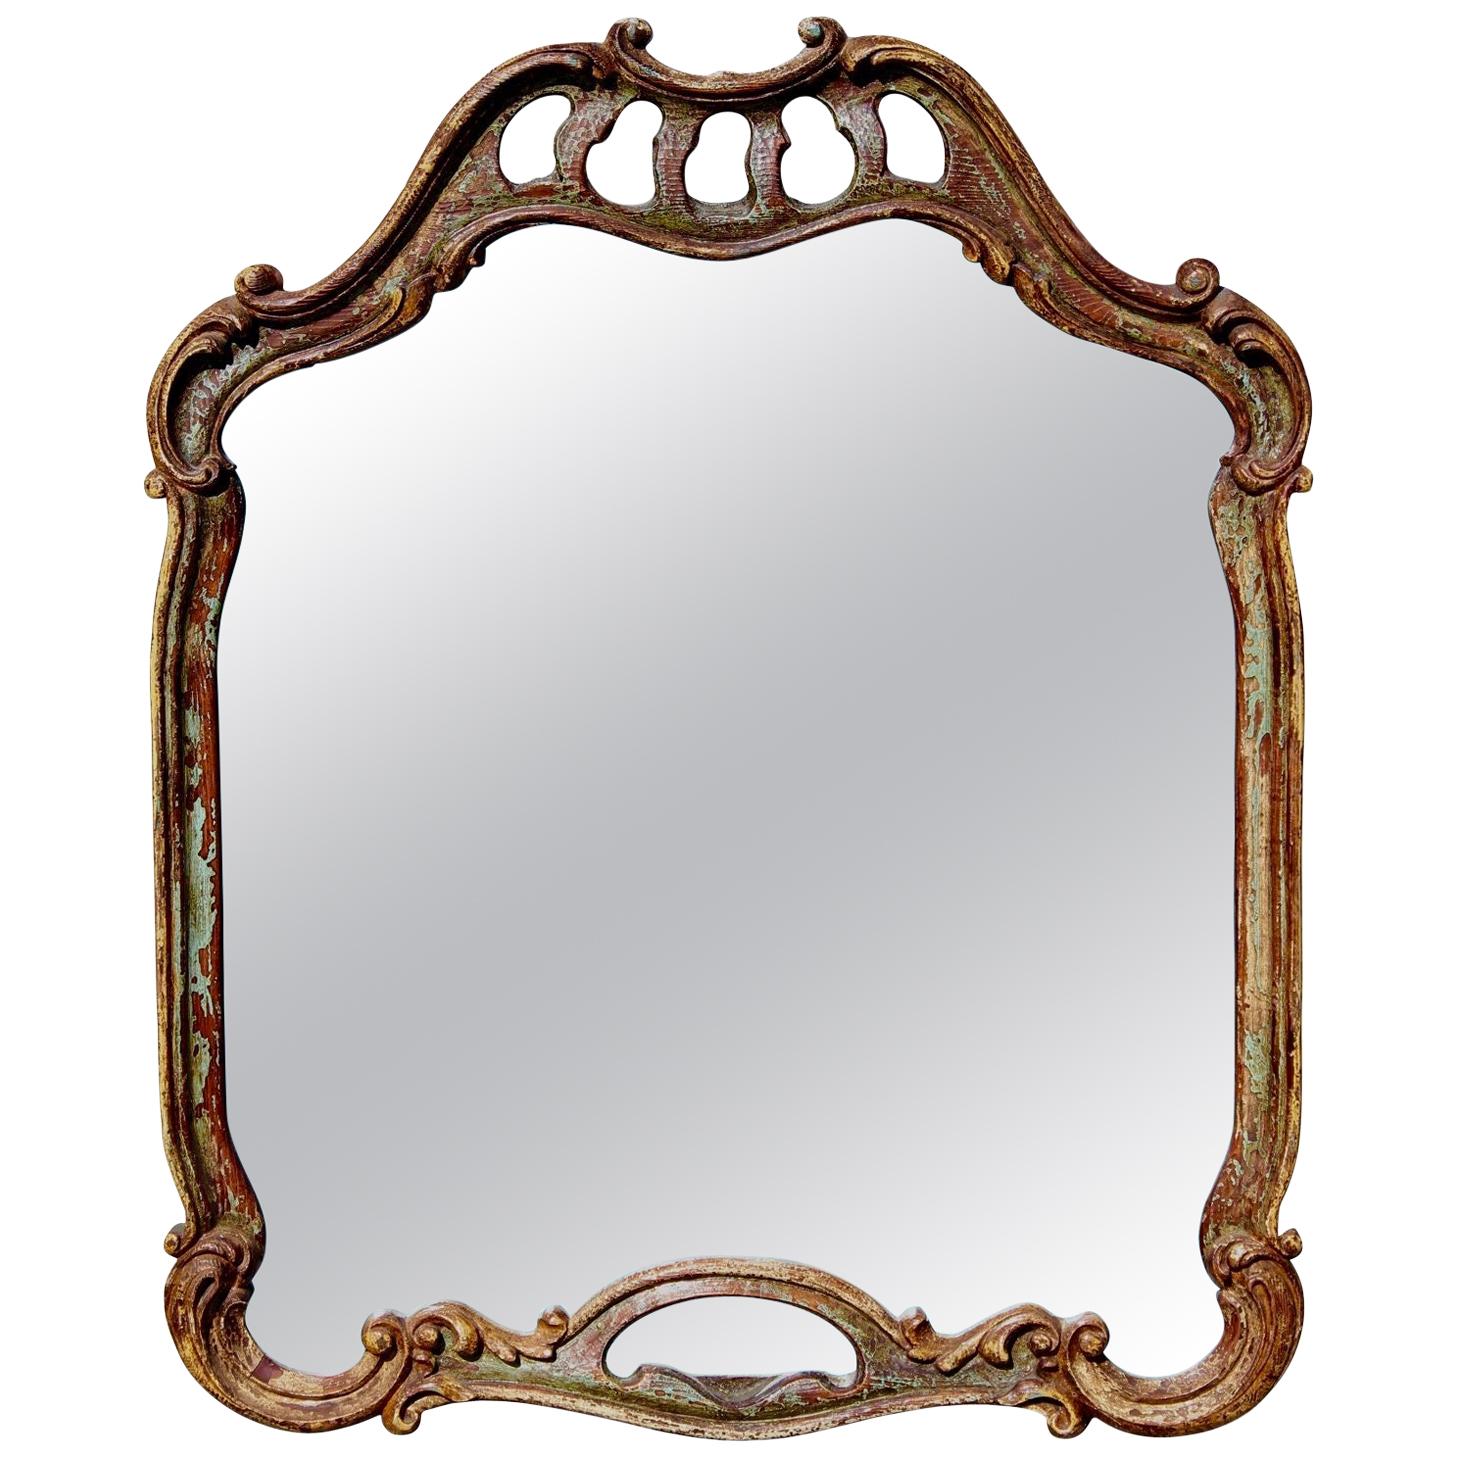 20th Century Antiqued Italian Scroll Mirror in Baroque Style